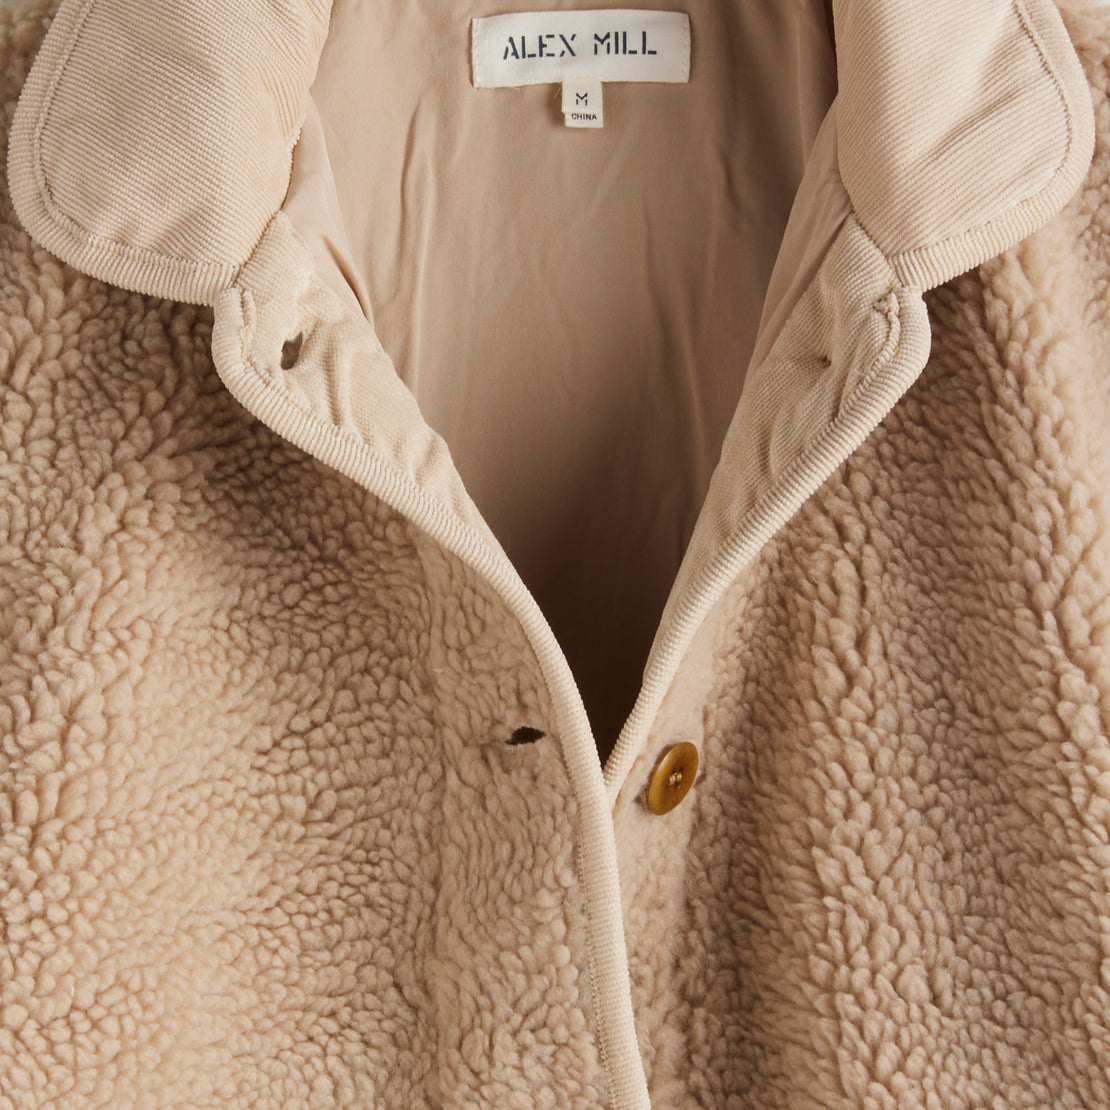 Sherpa Fleece Jacket - Natural - Alex Mill - STAG Provisions - W - Outerwear - Coat/Jacket